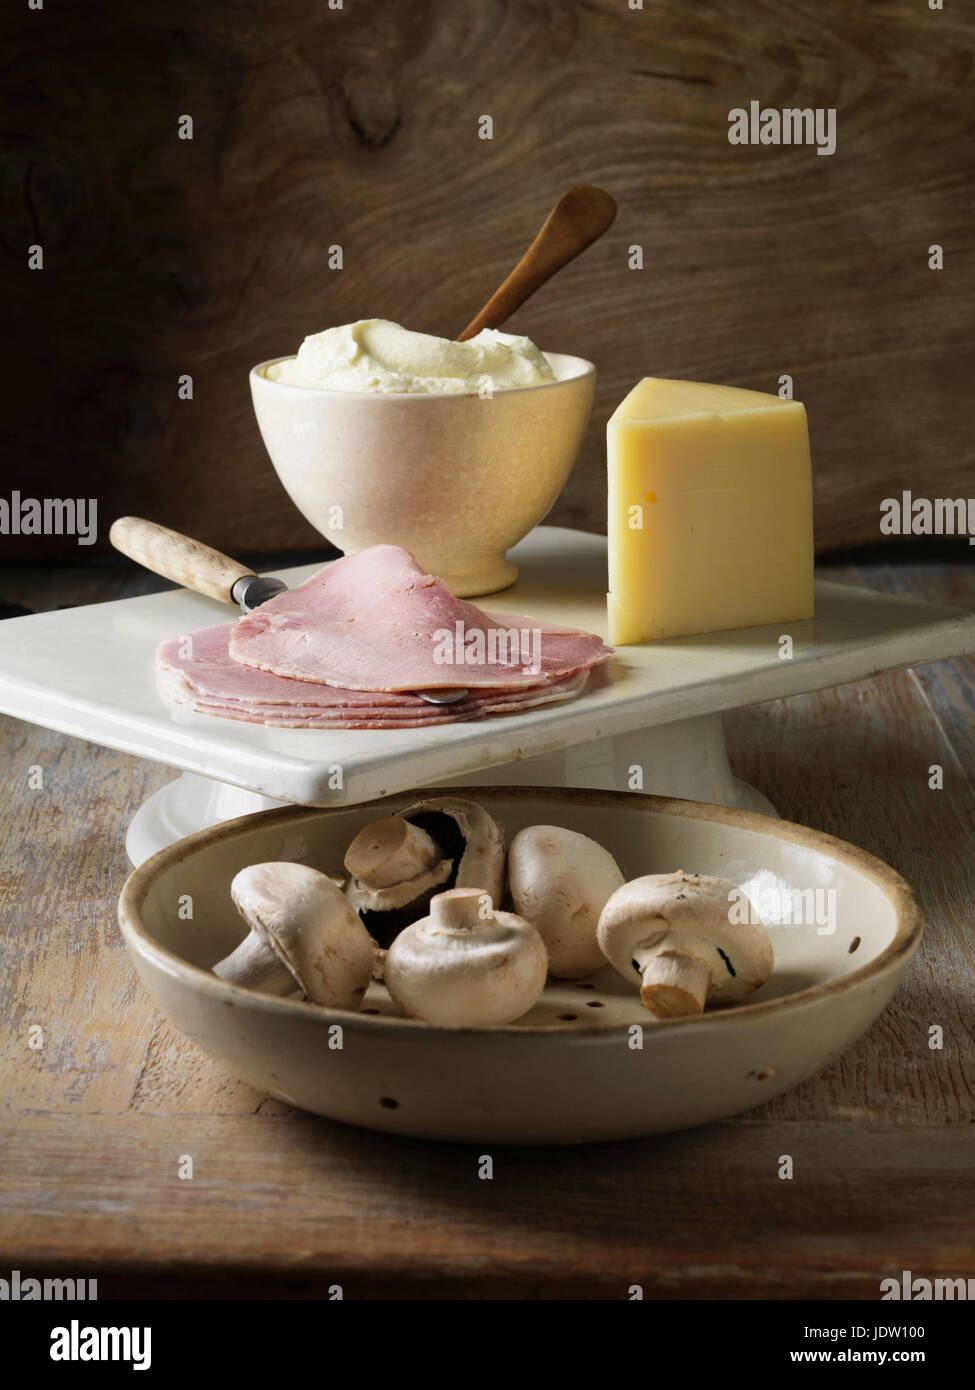 Mushrooms, ham and cheese on board Stock Photo